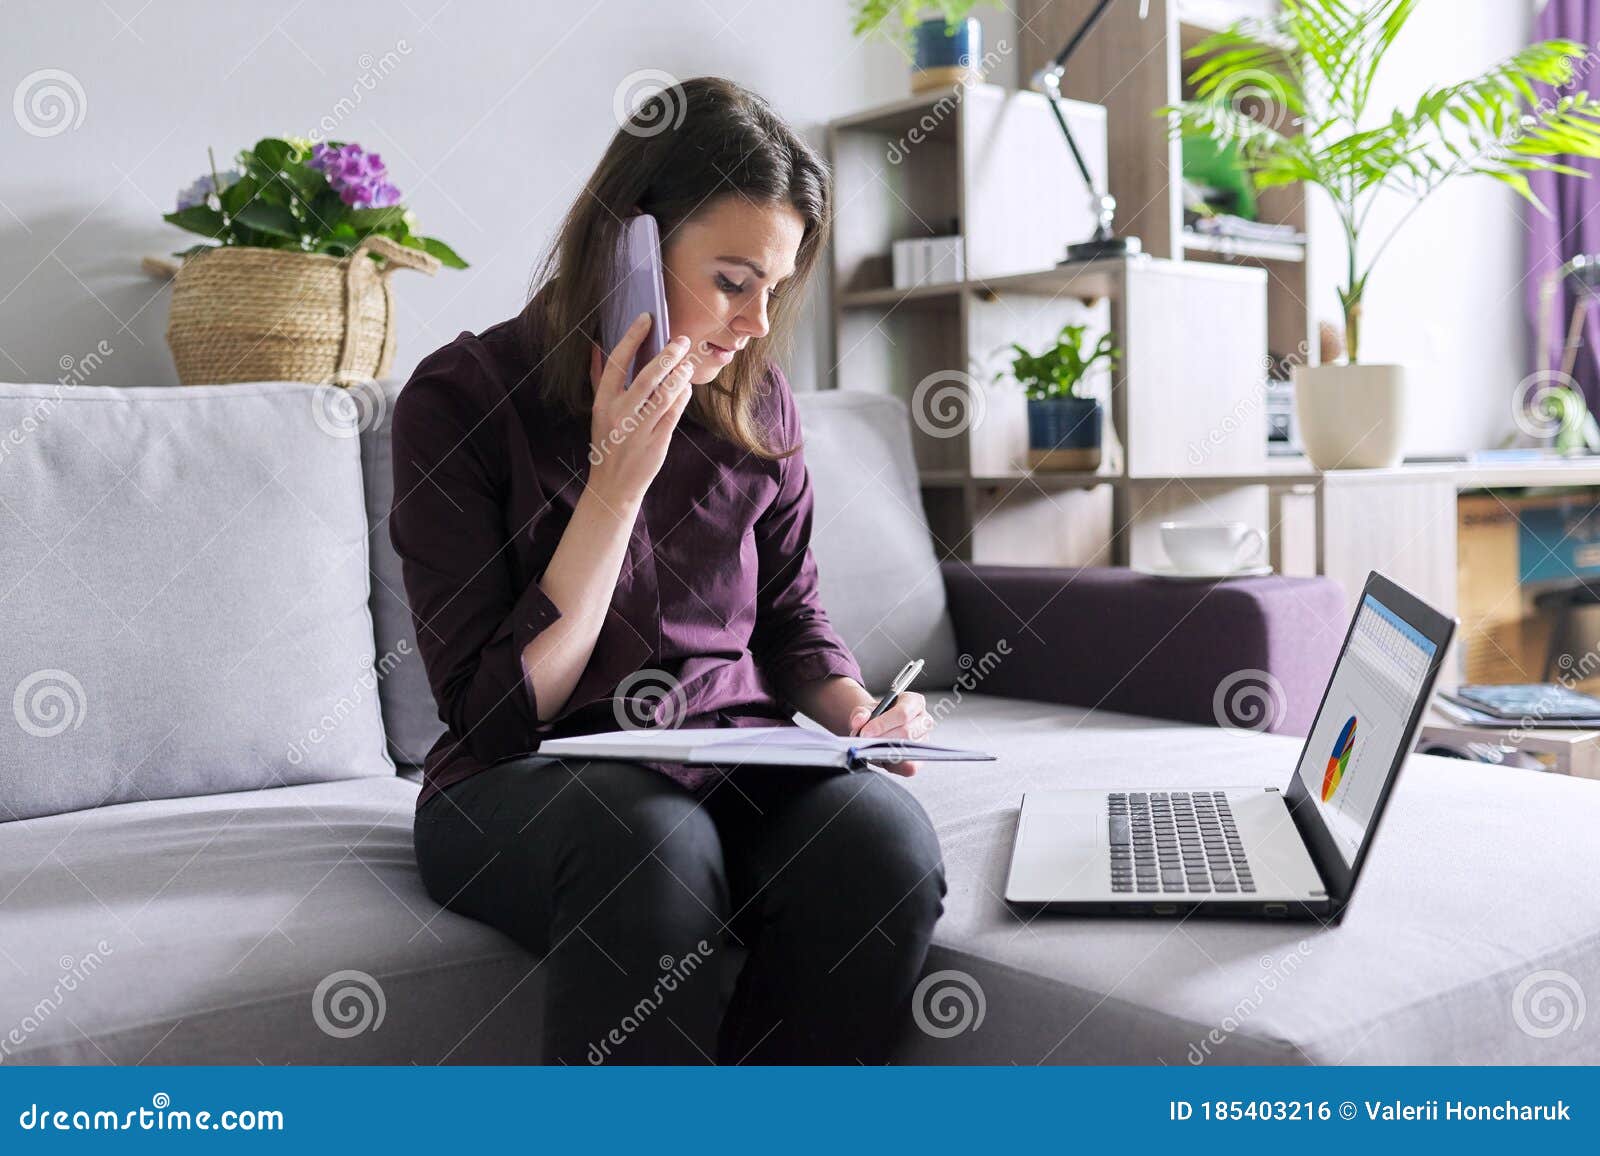 young woman working remotely at home, business female freelancer